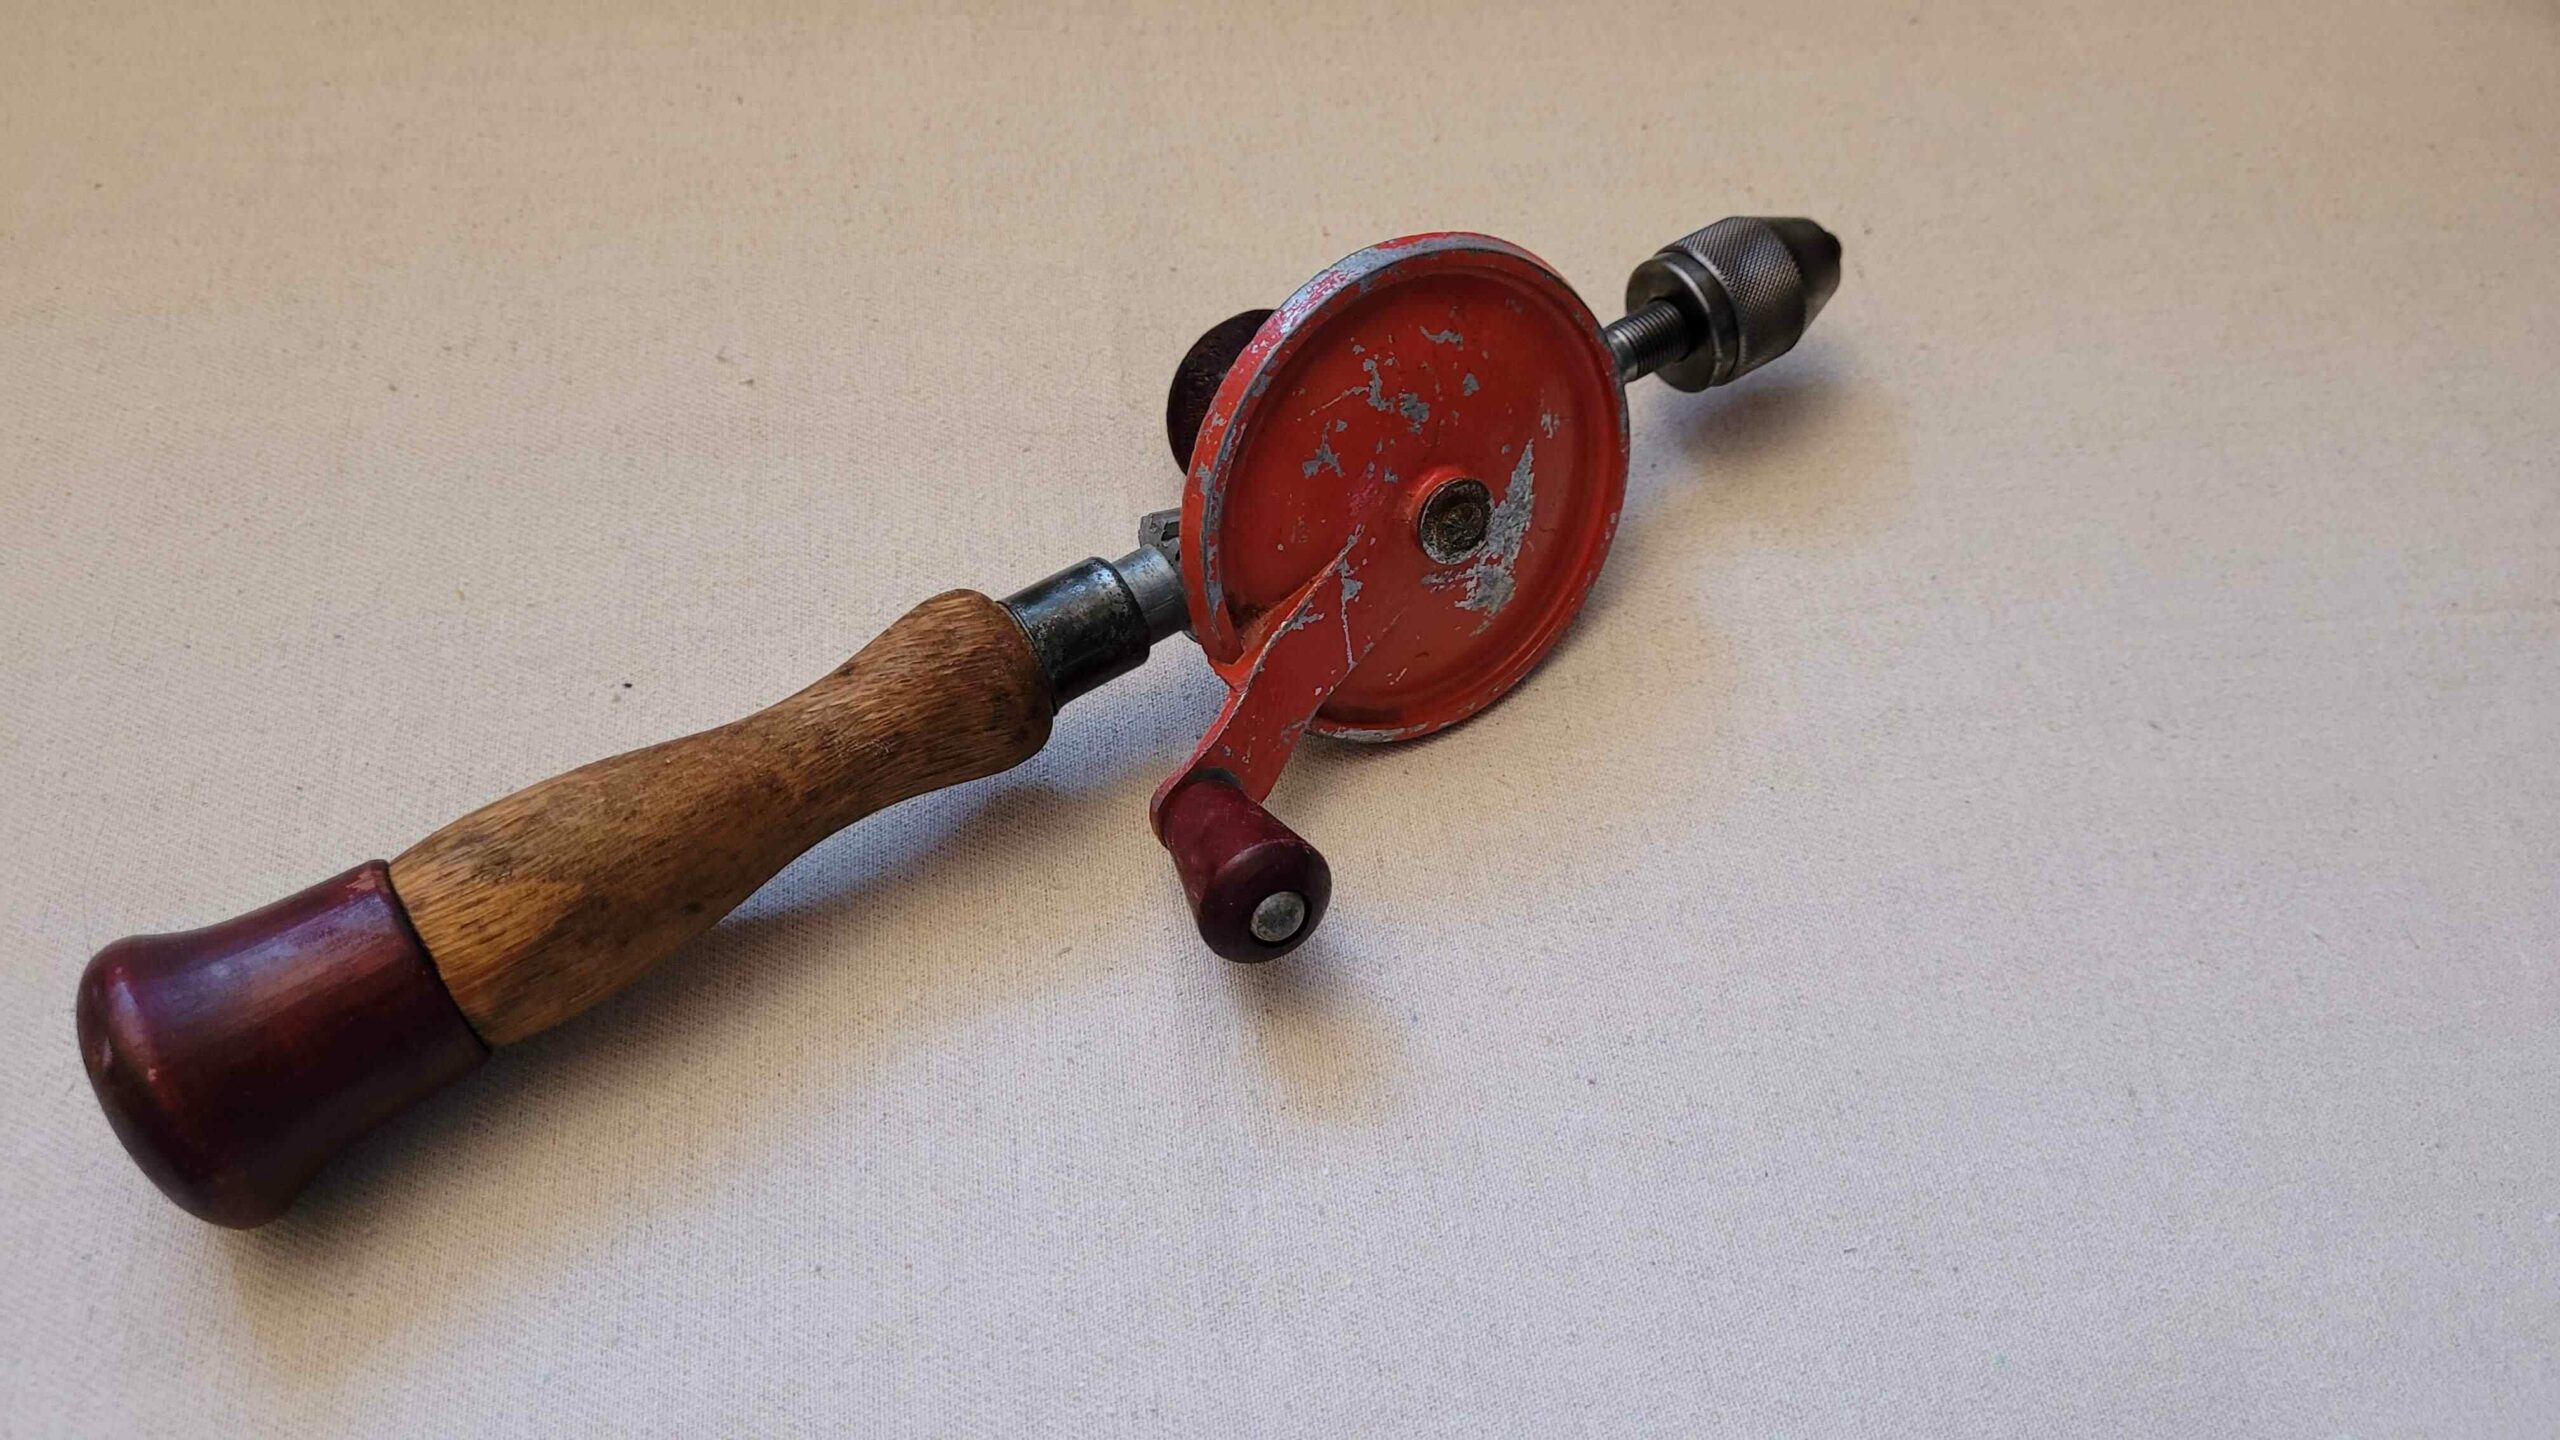 Vintage 1950s Hand Crank Drill Egg Beater Style Wood handle Pat No 476297 made in Japan